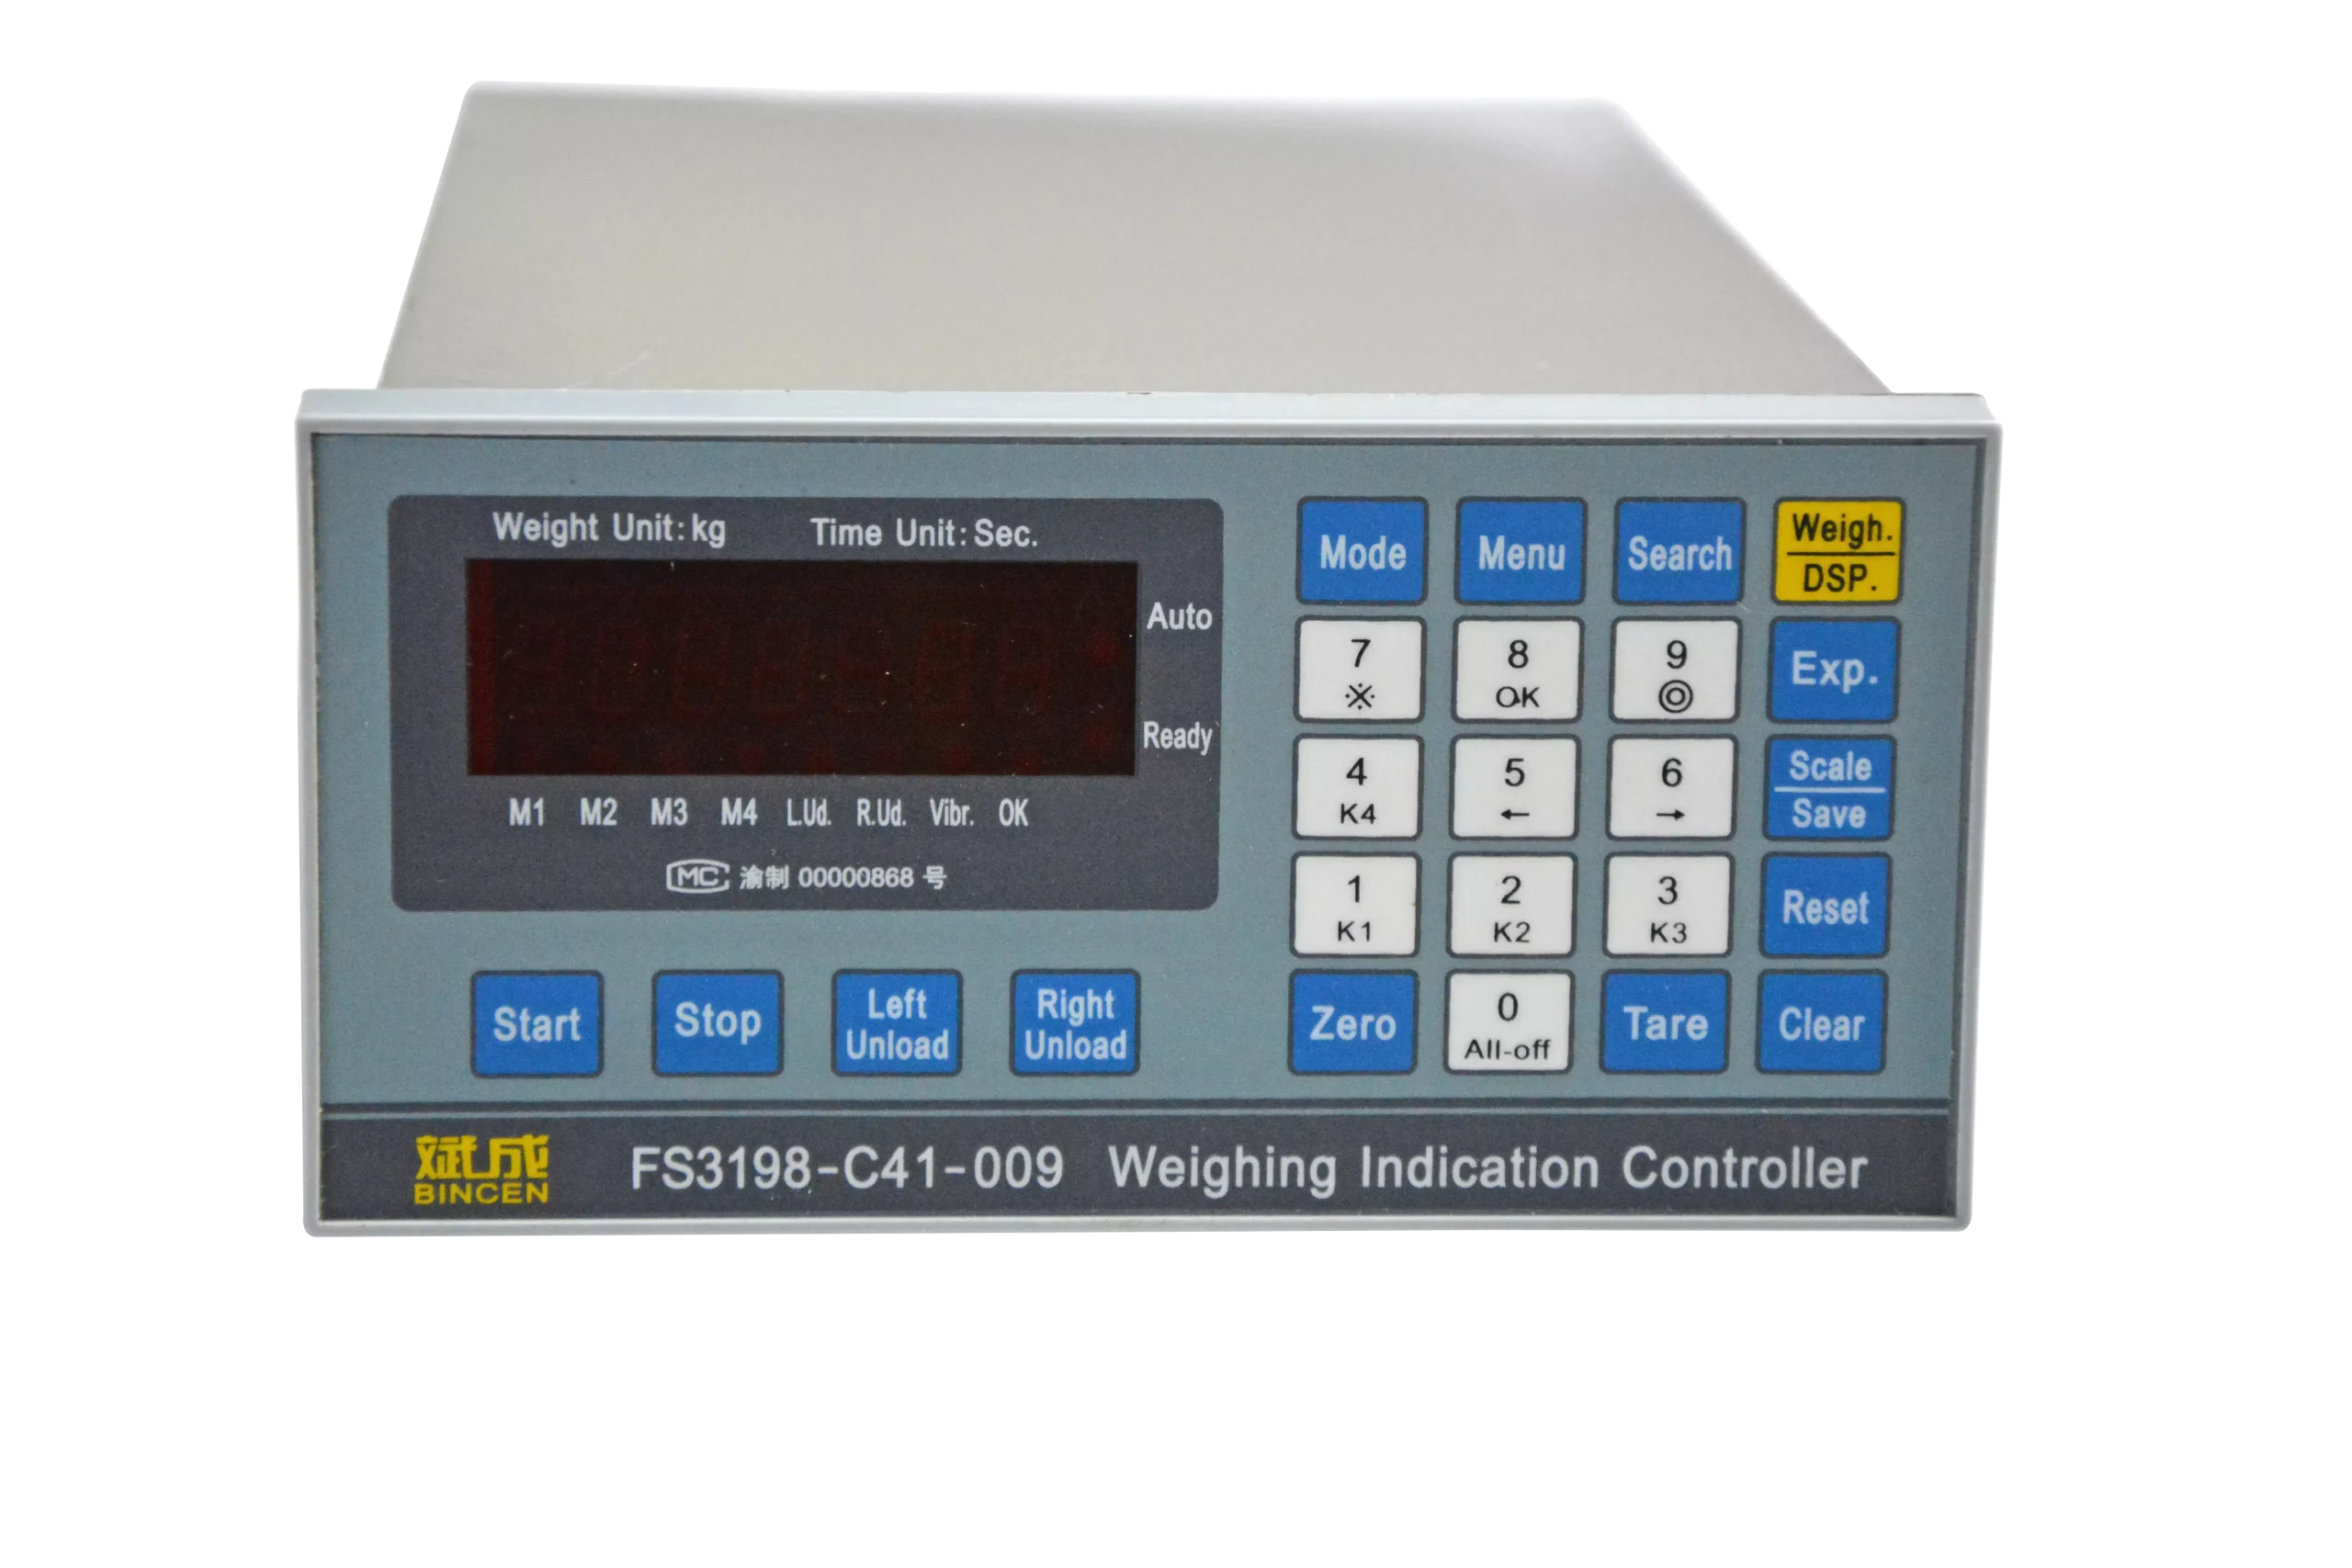 Weighing and Batching Controller5